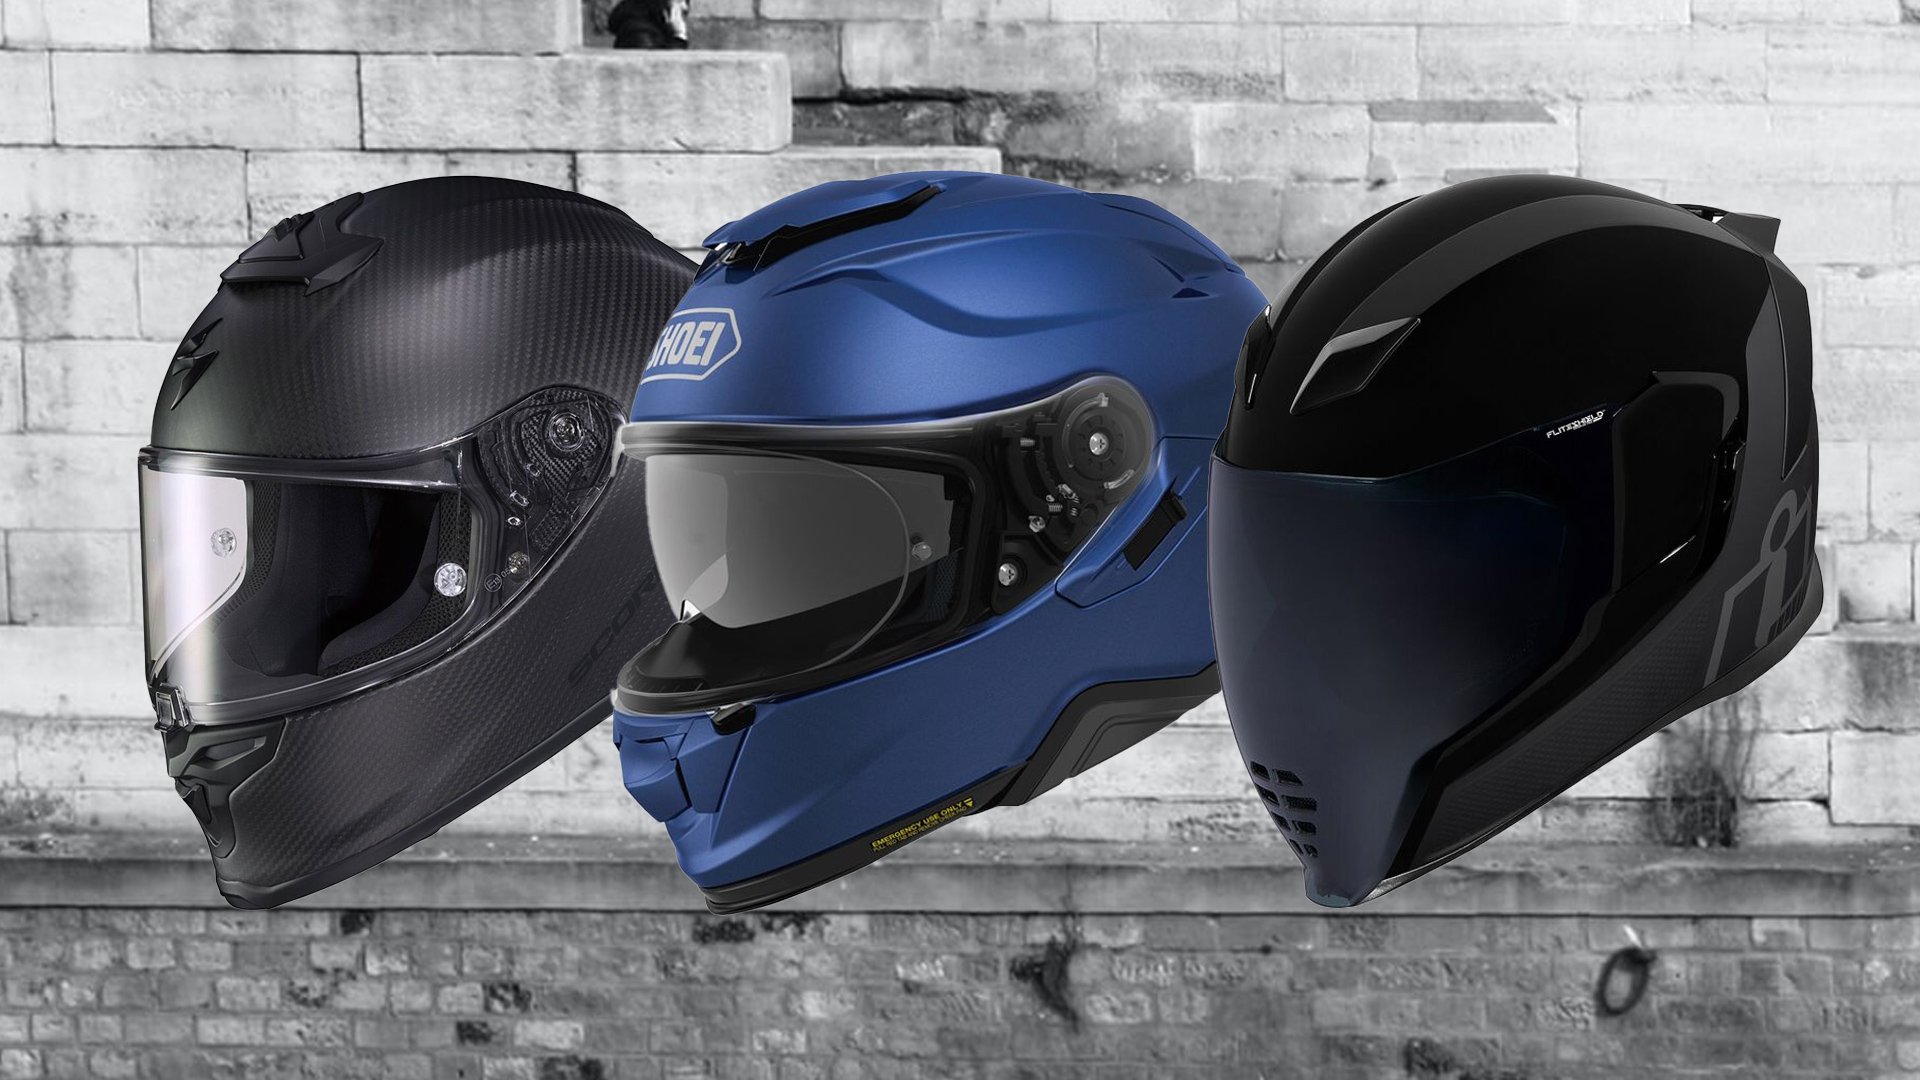 The 5 Best Full-Face Motorcycle Helmets for 2022